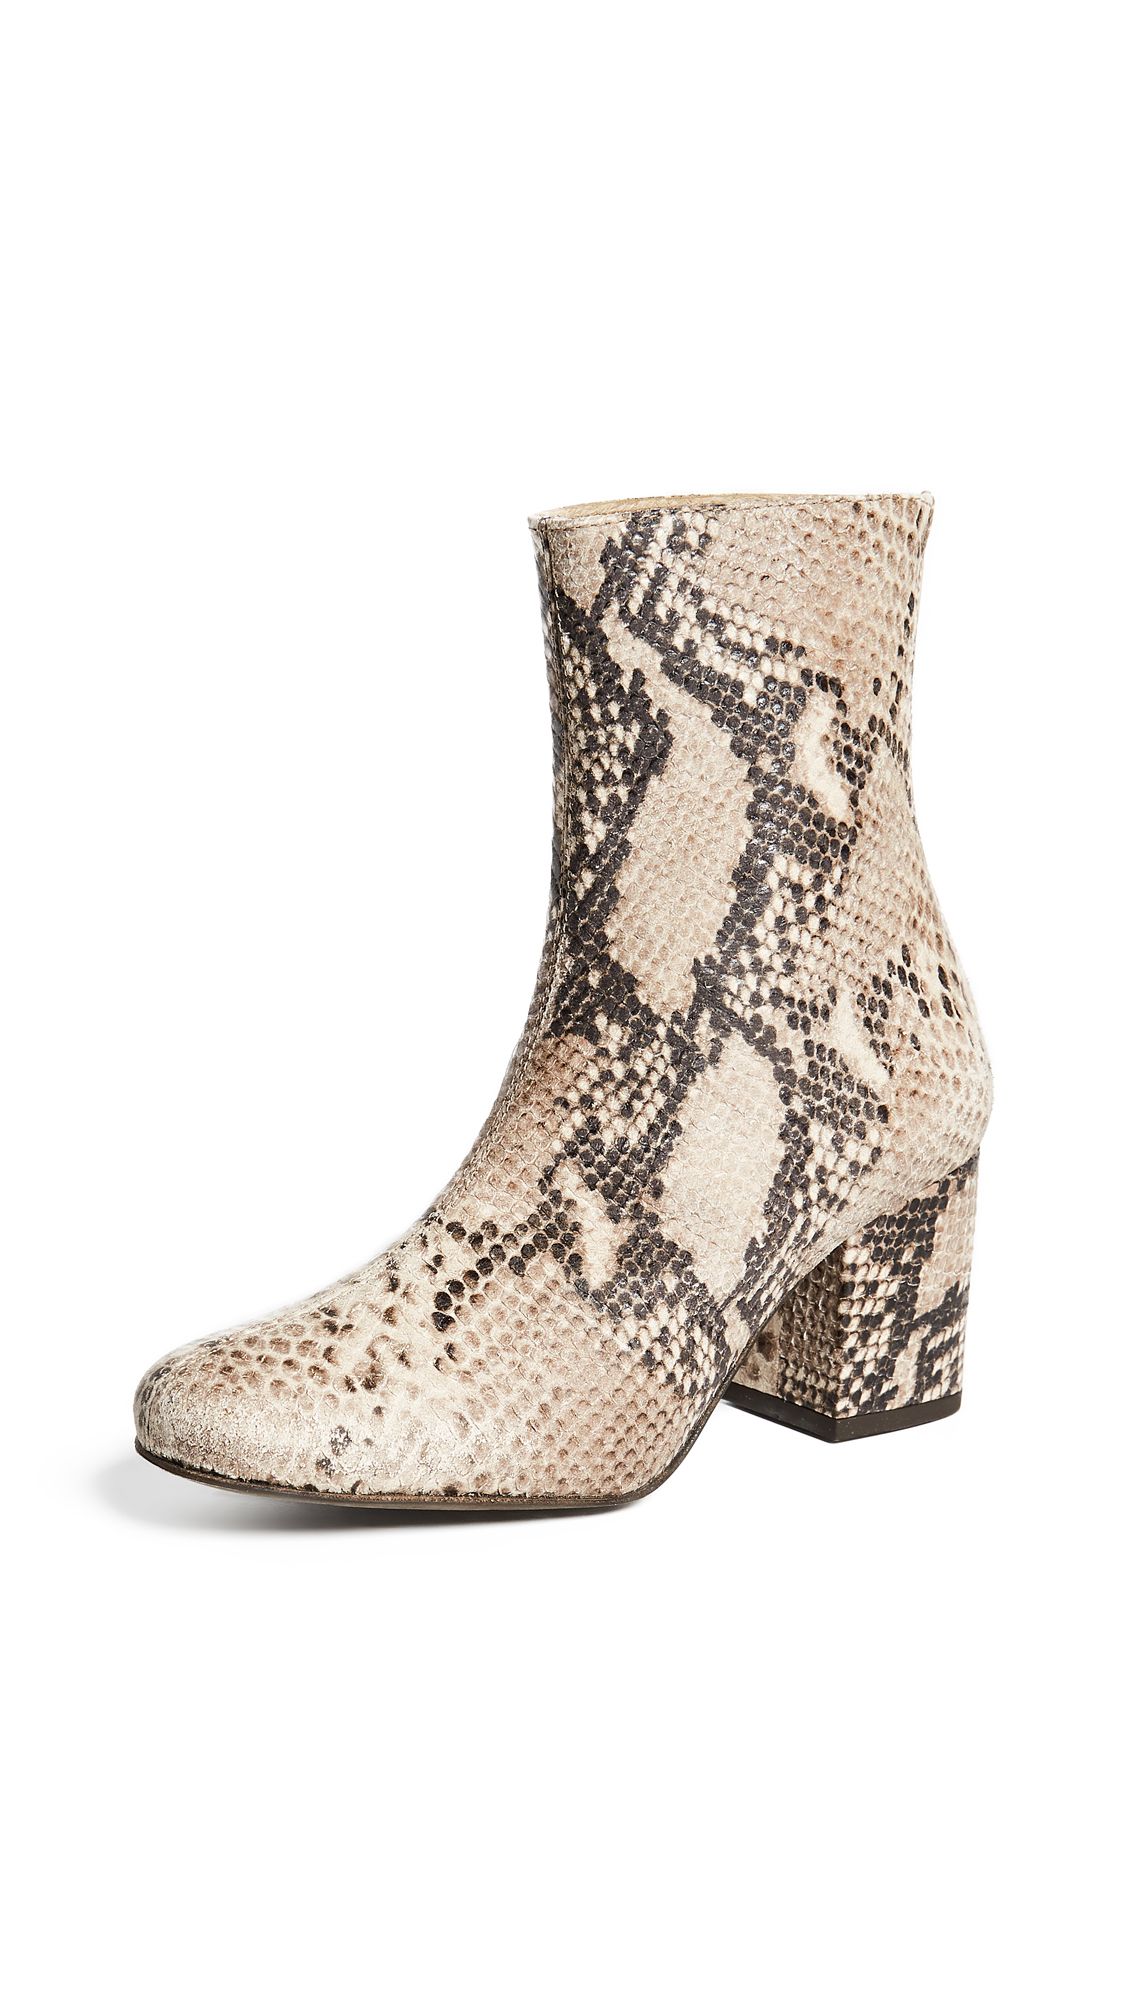 Free People Cecile Ankle Booties | Shopbop